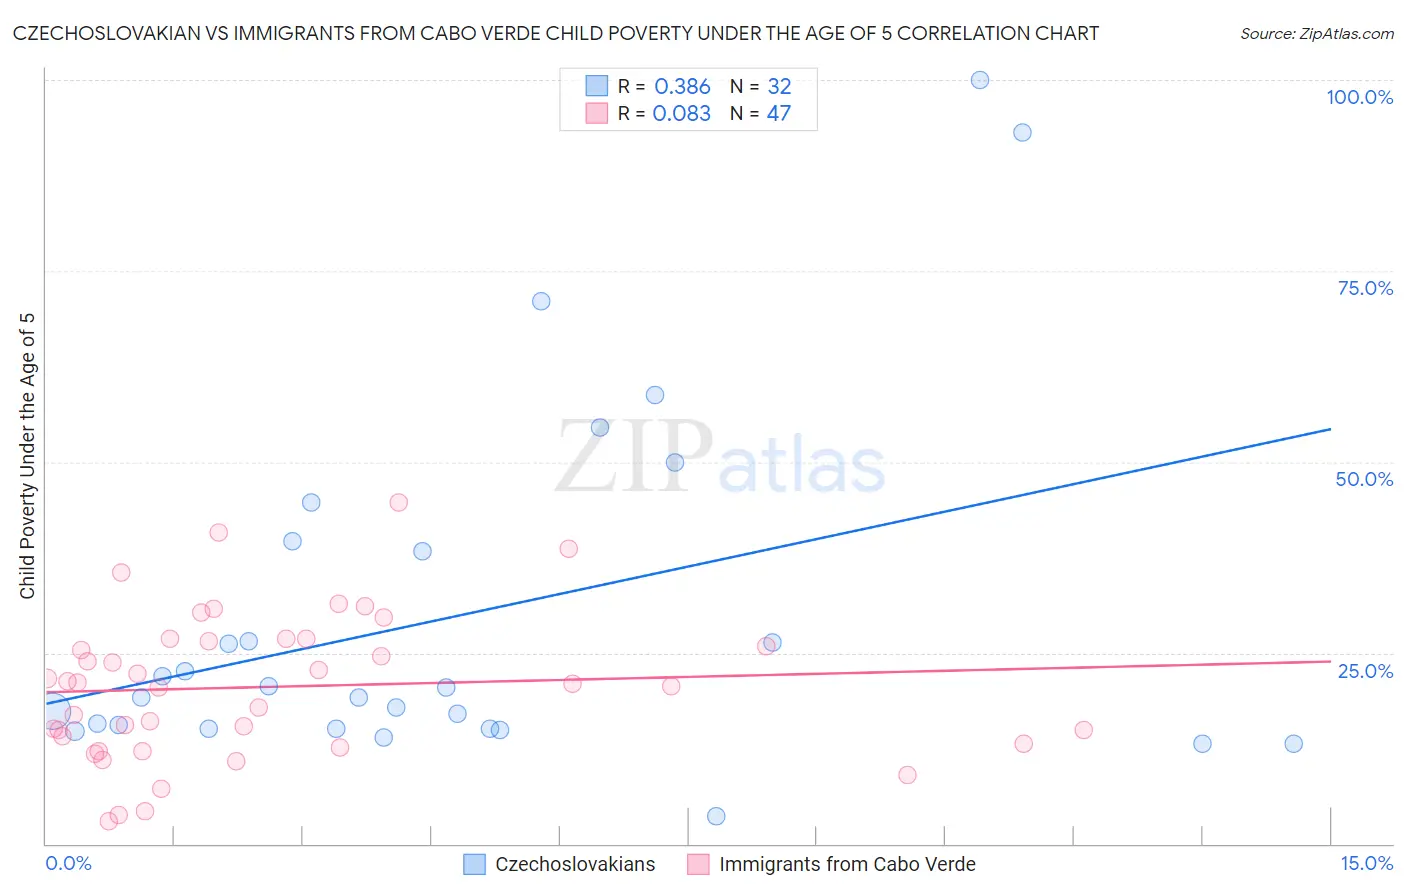 Czechoslovakian vs Immigrants from Cabo Verde Child Poverty Under the Age of 5